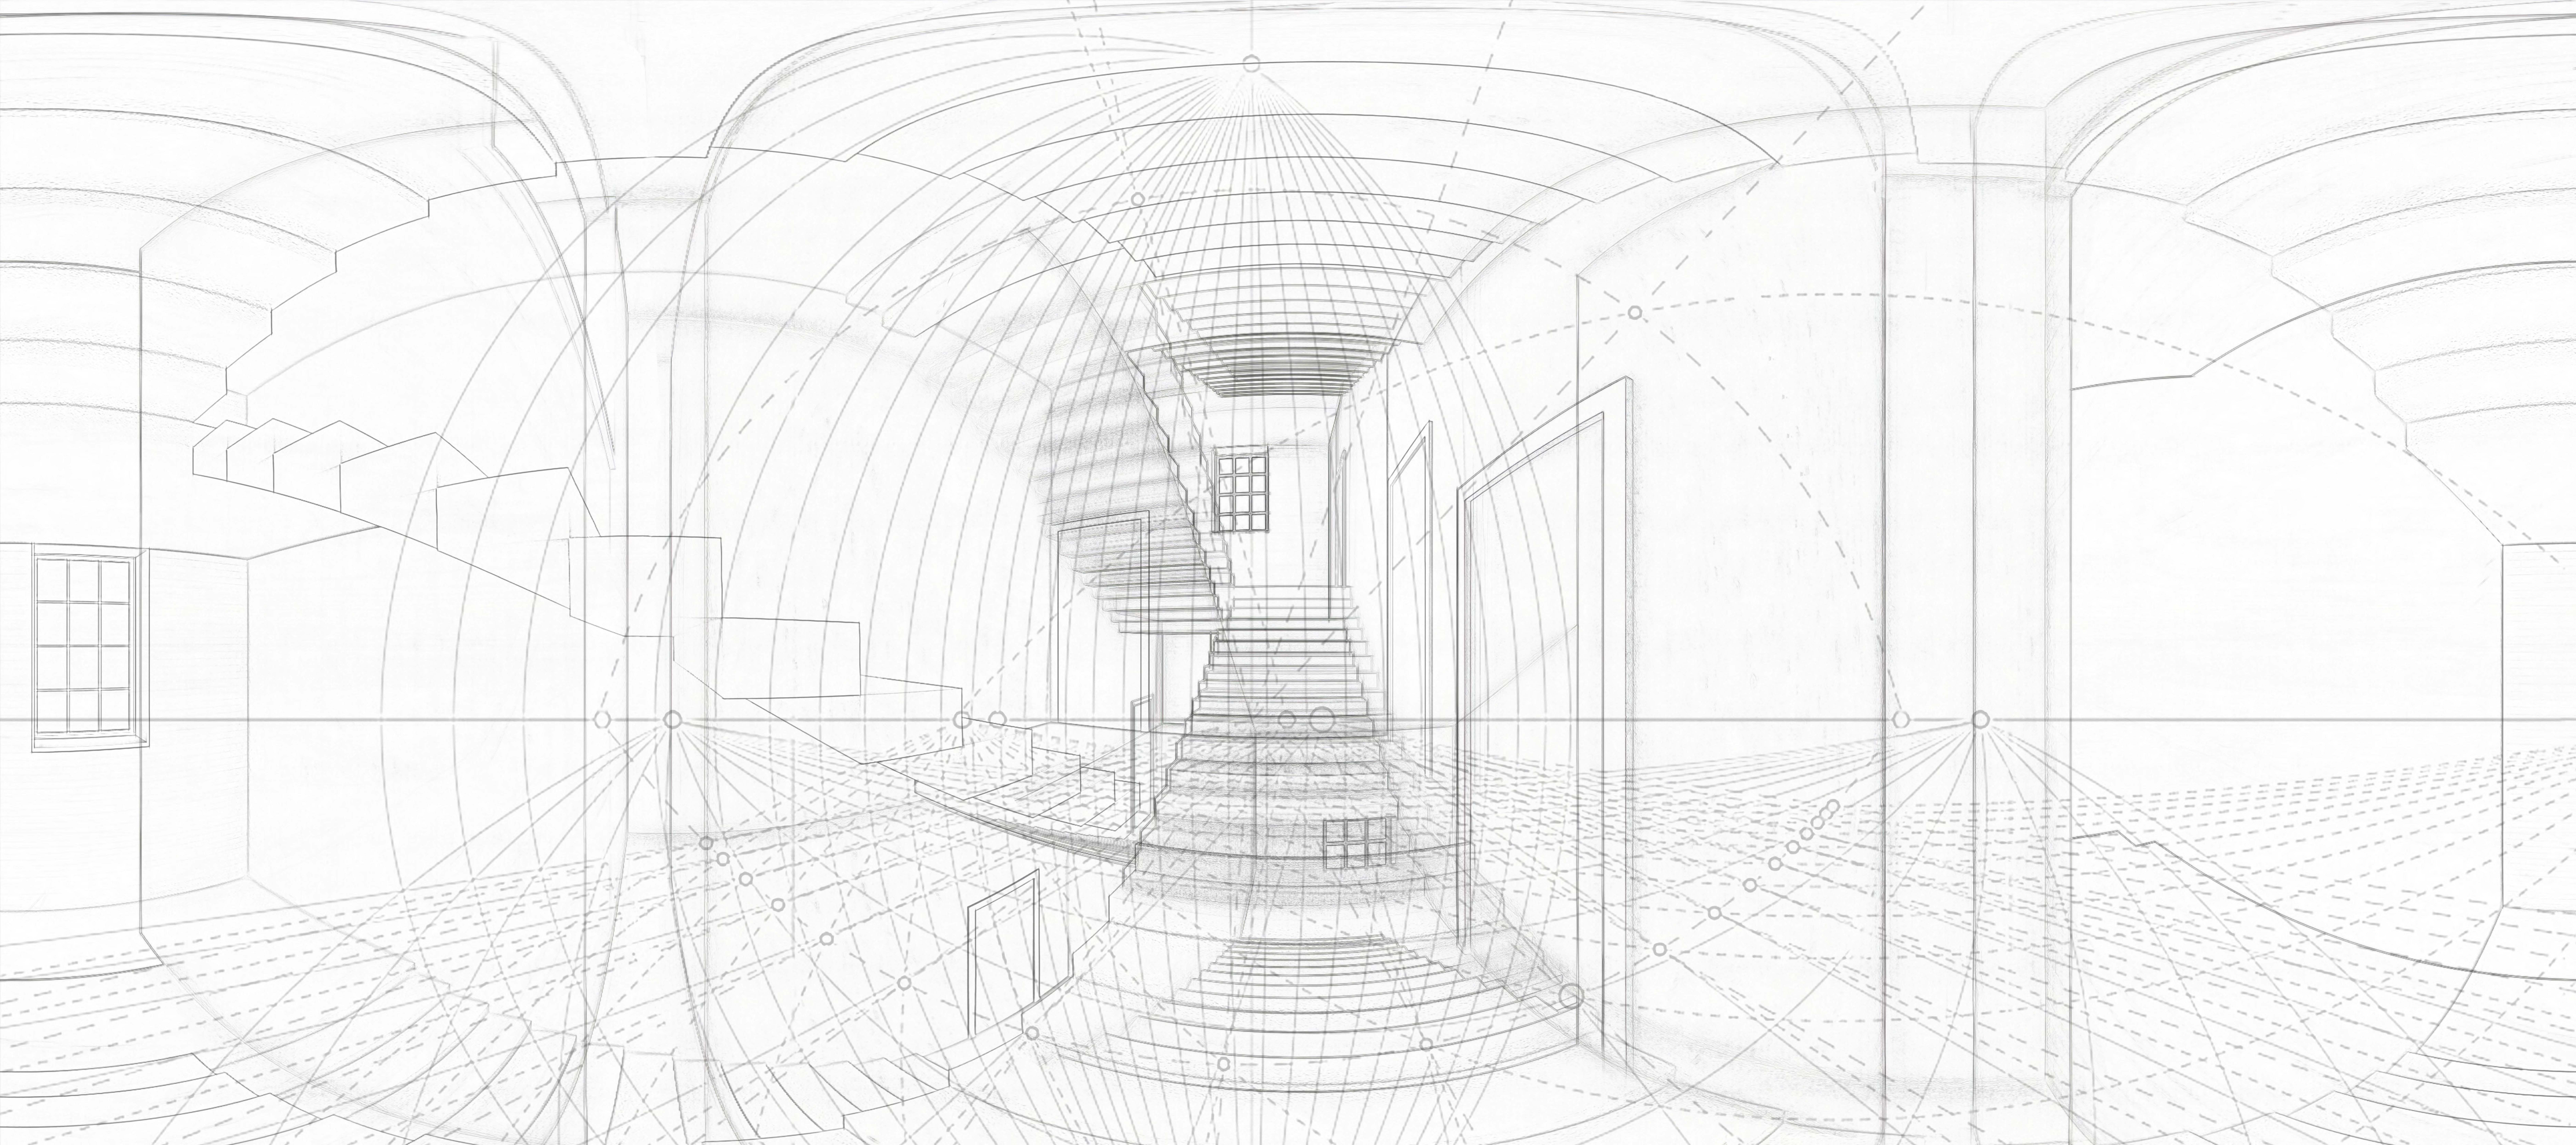 /The%20image%20depicts%20a%20complex%20wireframe%20architectural%20drawing%20of%20an%20interior%20space.%20The%20drawing%20showcases%20a%20detailed%20perspective%20view%20with%20multiple%20vanishing%20points%2C%20emphasizing%20the%20depth%20and%20structure%20of%20the%20space.%20